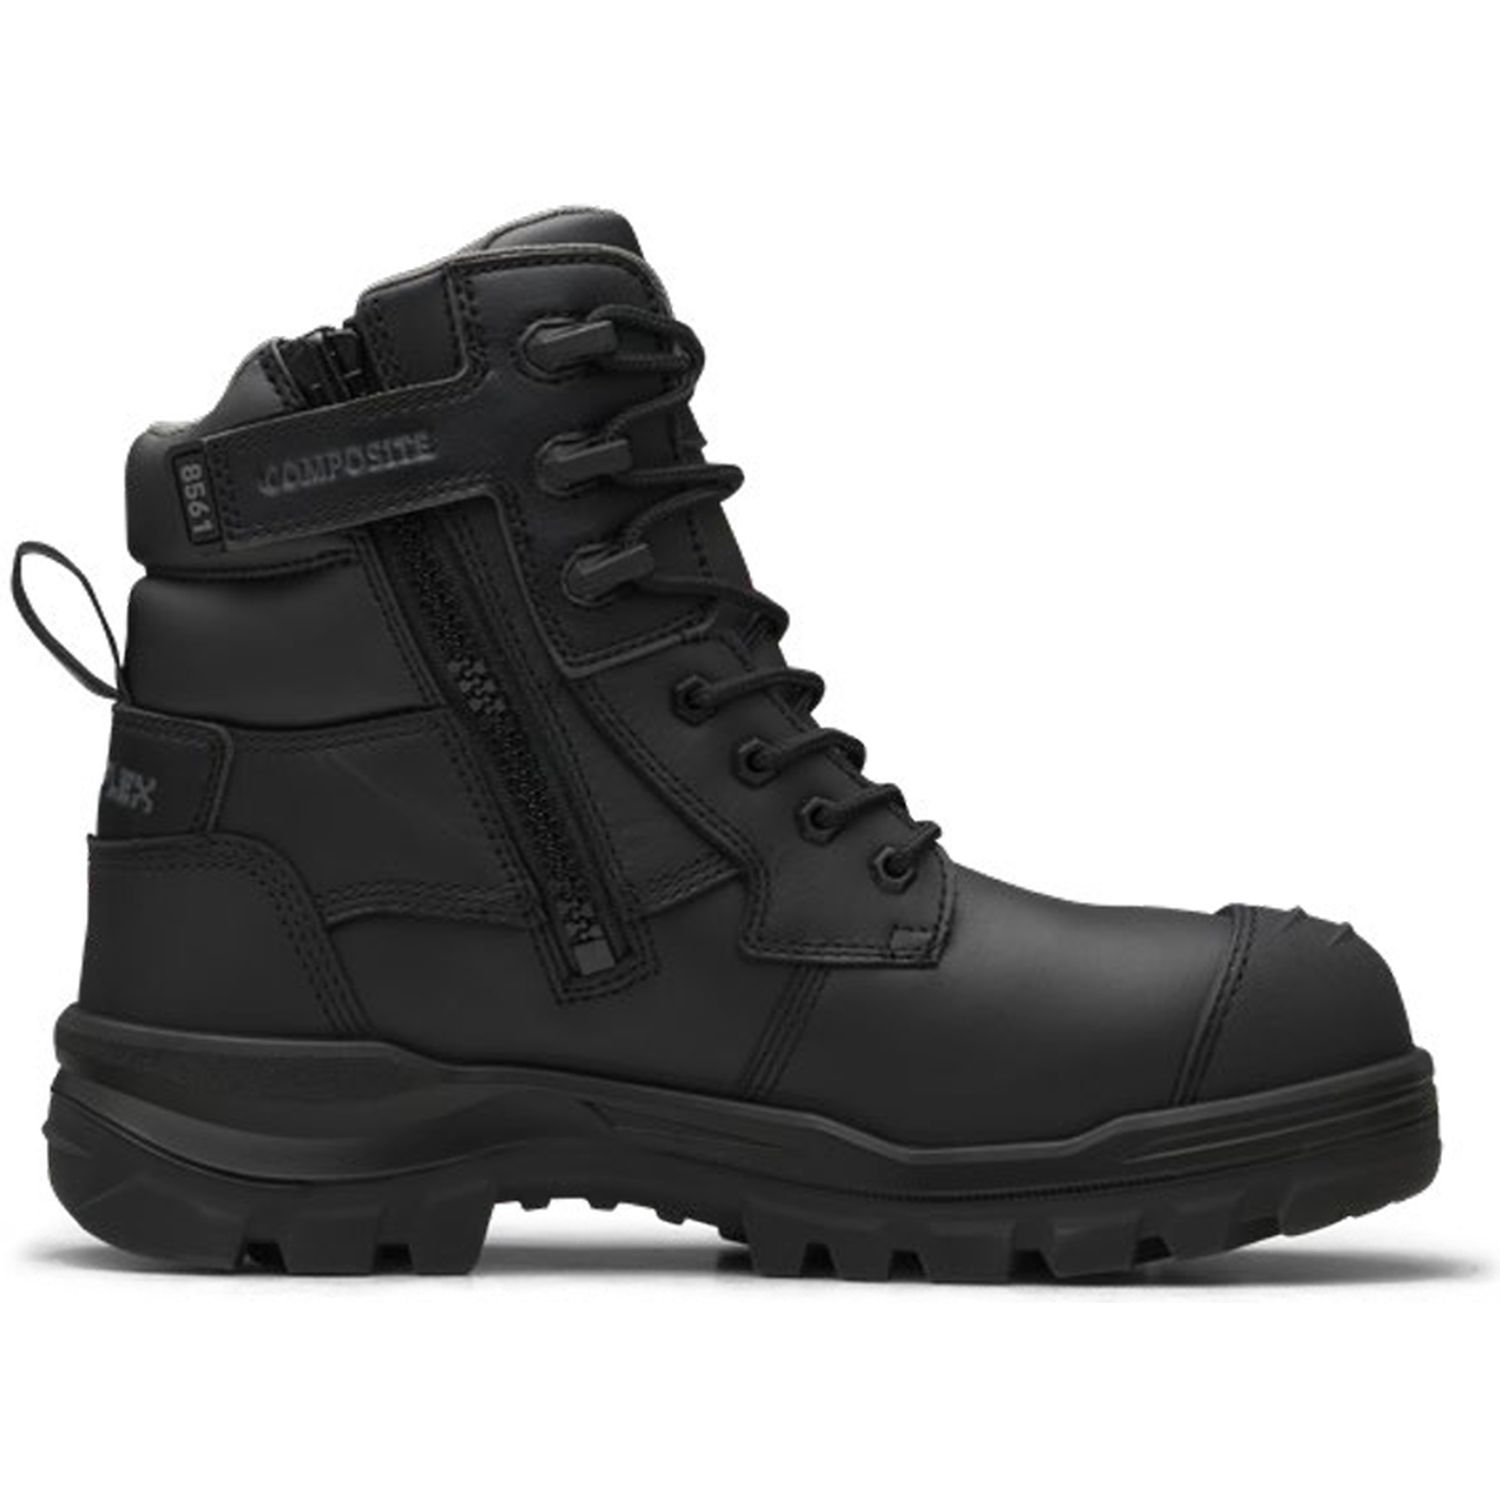 Blundstone 8561 Lace Up/Zip TPU Composite Safety Boot Black